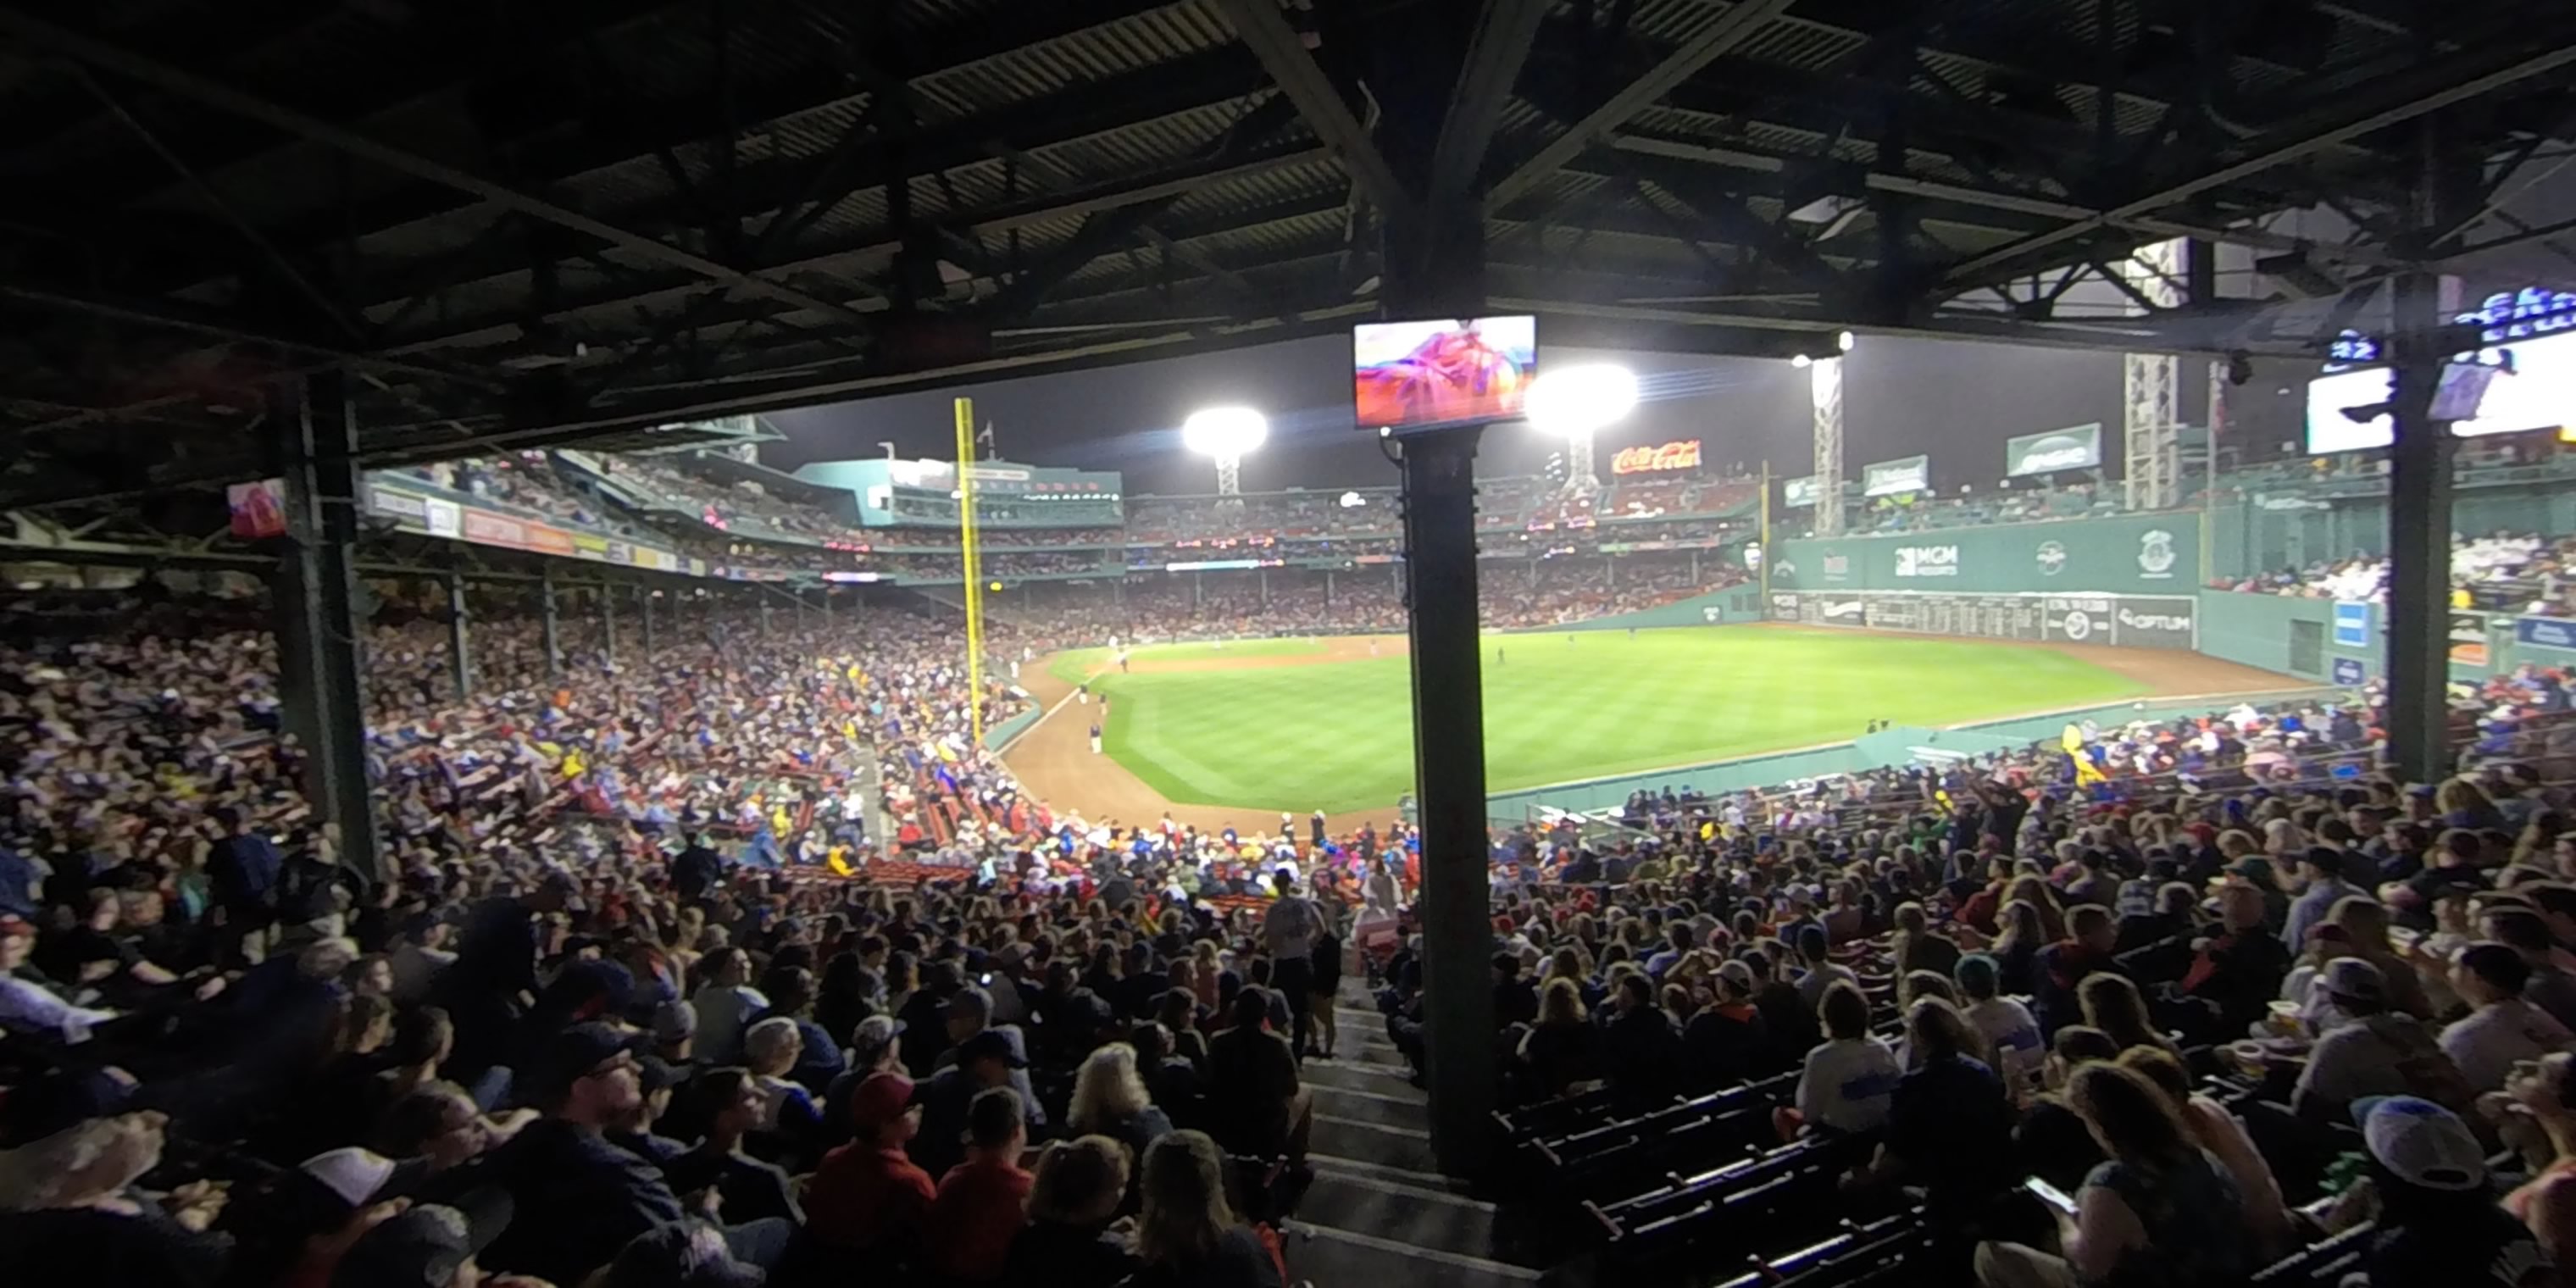 grandstand 2 panoramic seat view  for baseball - fenway park